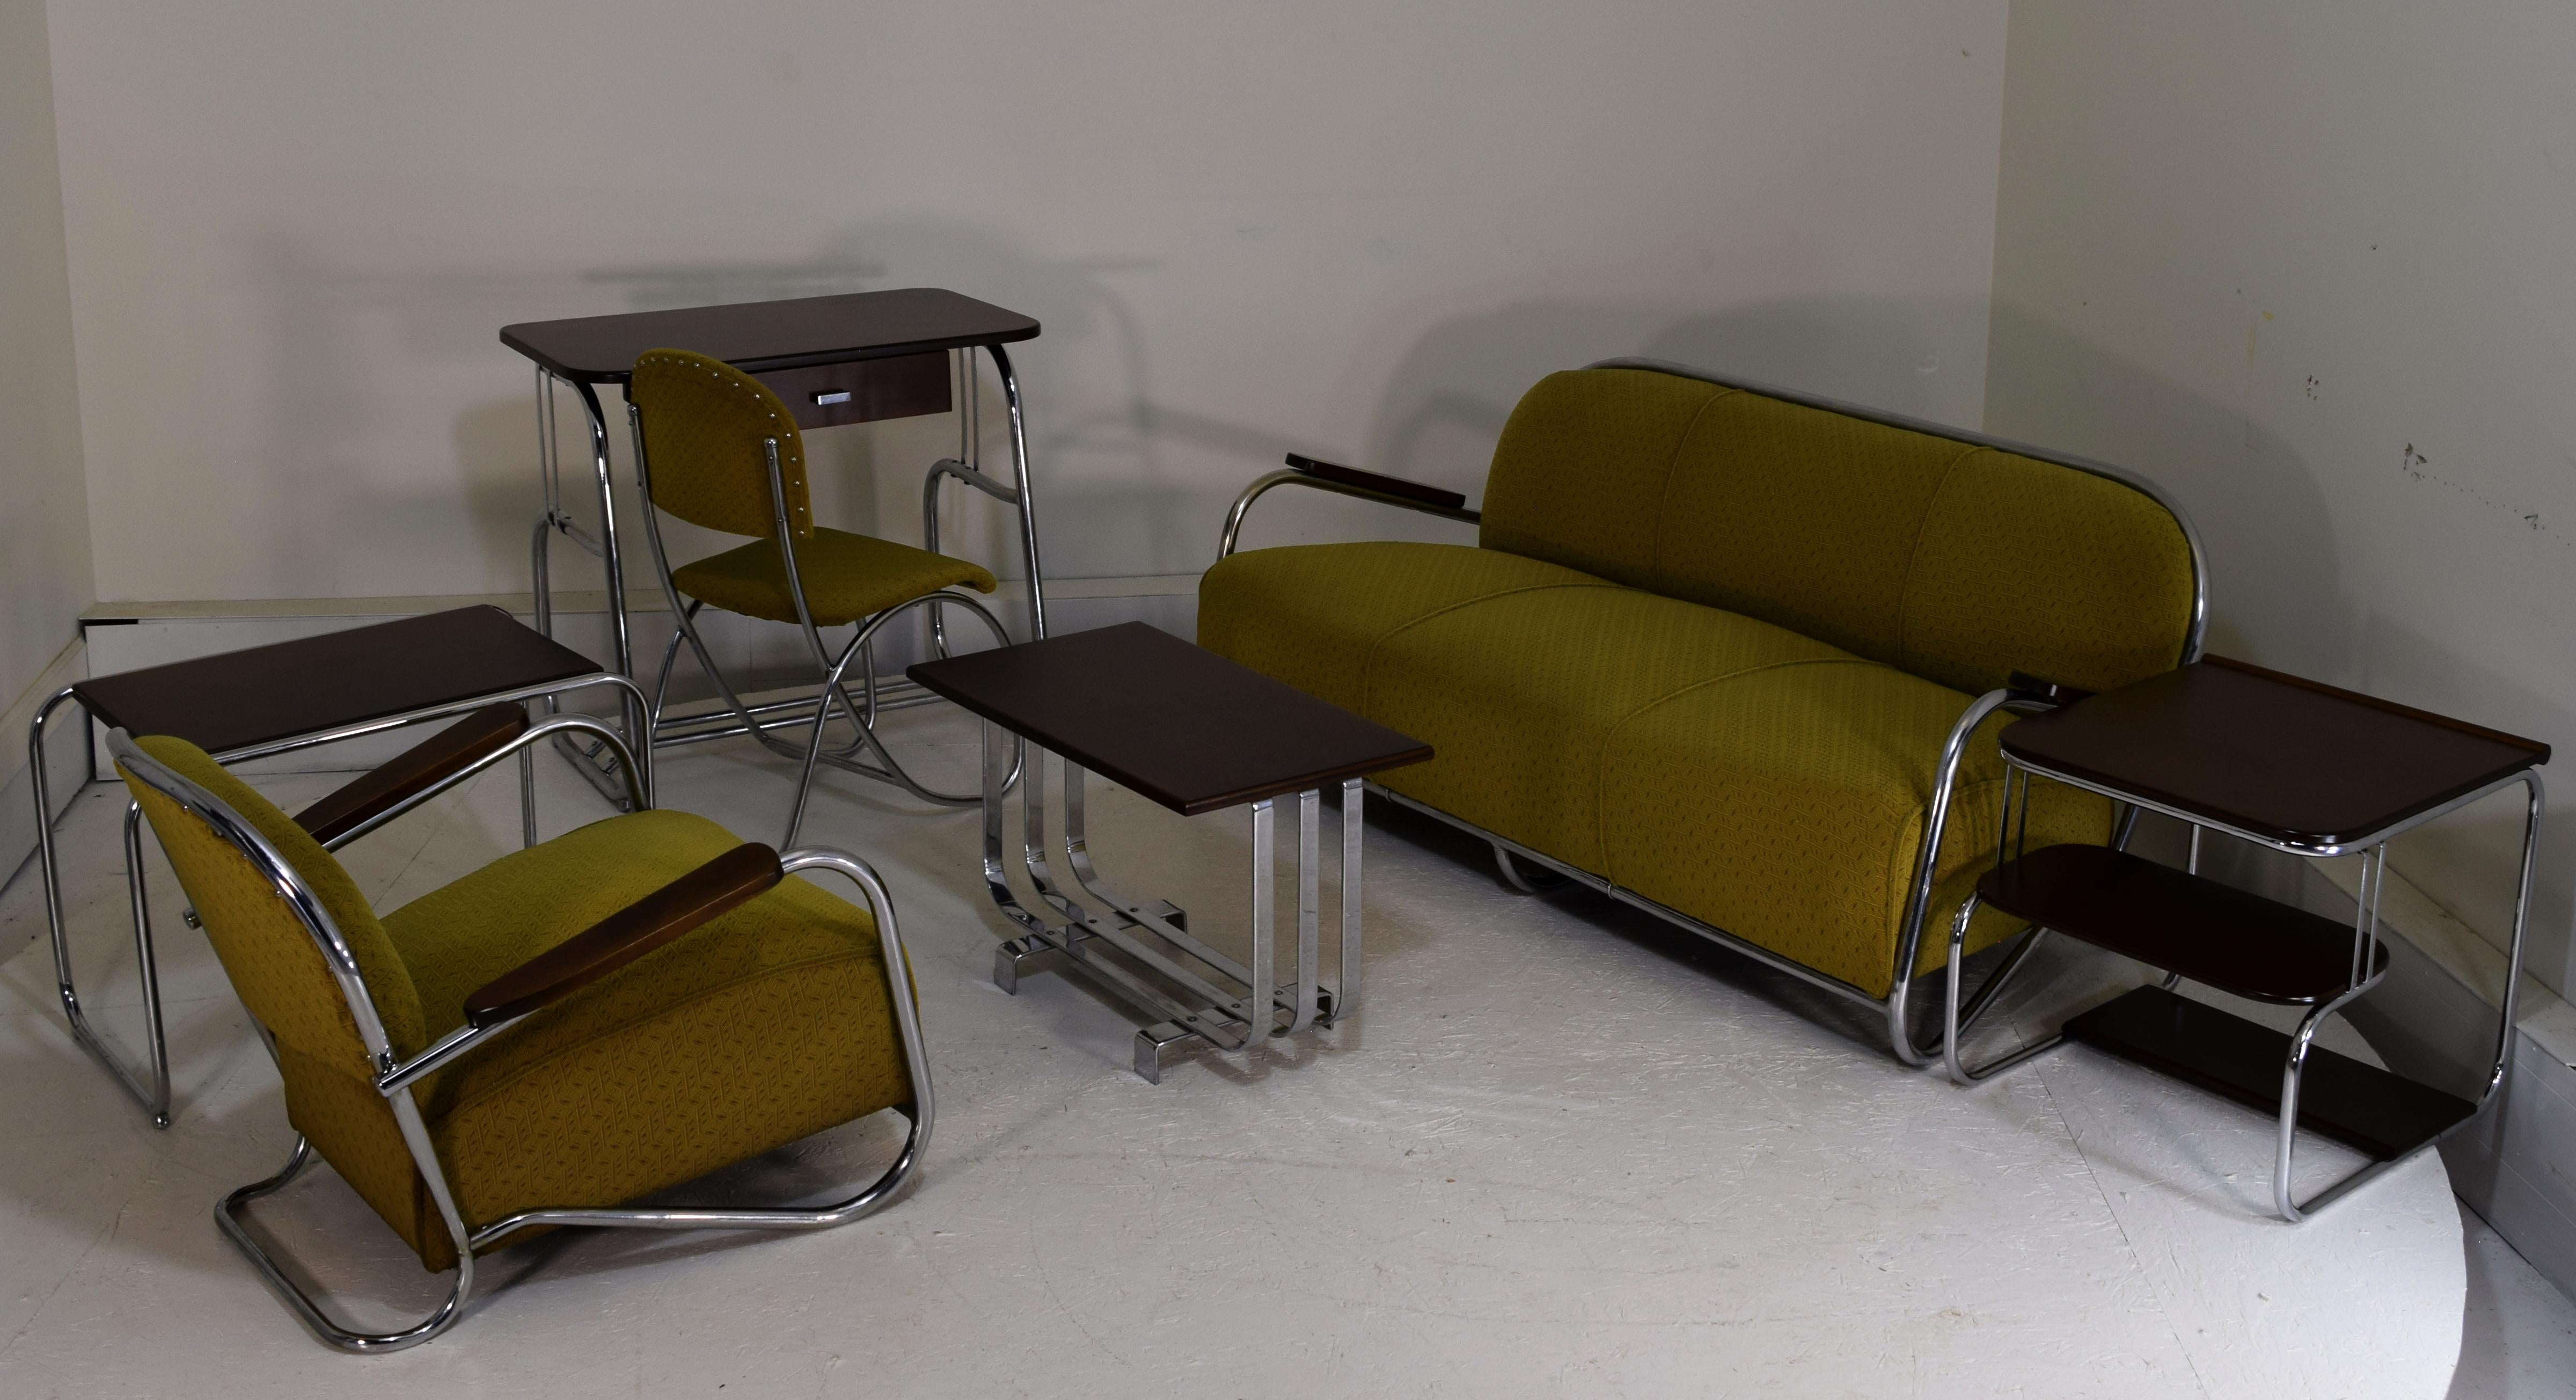 Streamline Moderne iconic design by Karl Emanuel Martin (K.E.M.) Weber designed in 1935 and manufactured '35-37 by Lloyd Manufacturing. Uncommon and most sought after form of seating suite in original fabric. Comes with rare provenance - a copy of